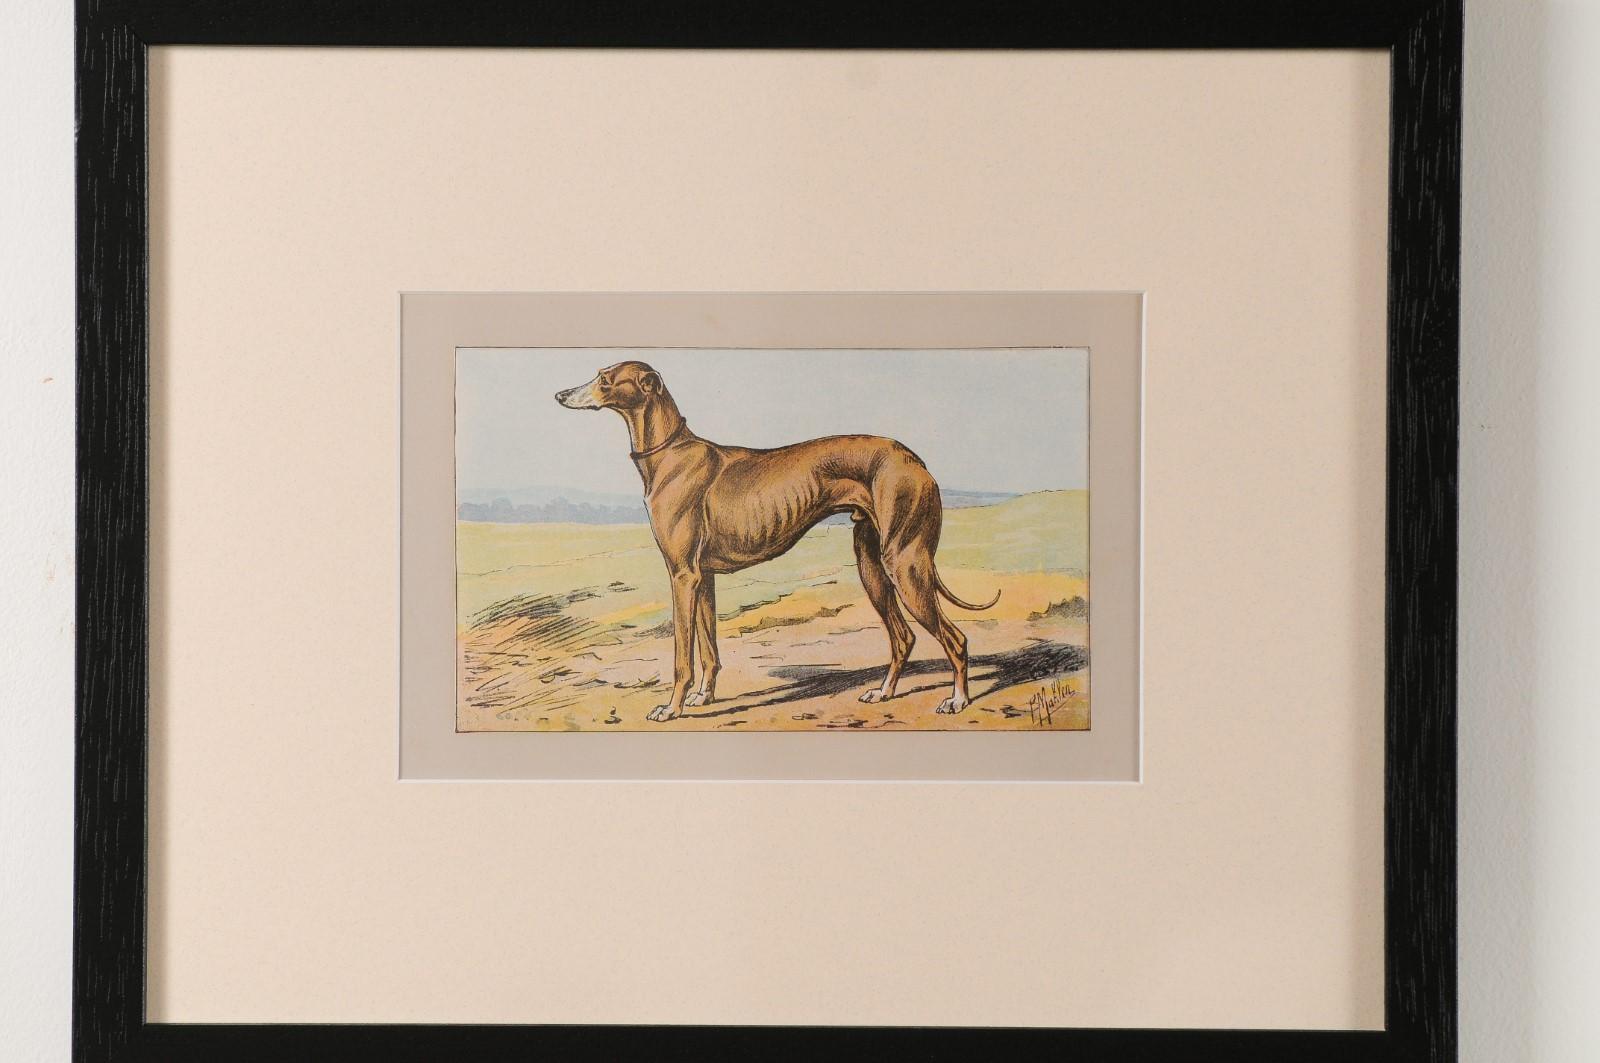 P. Mahler Custom Framed Lithographs Depicting Hunting Dogs in Outdoor Scenes 8